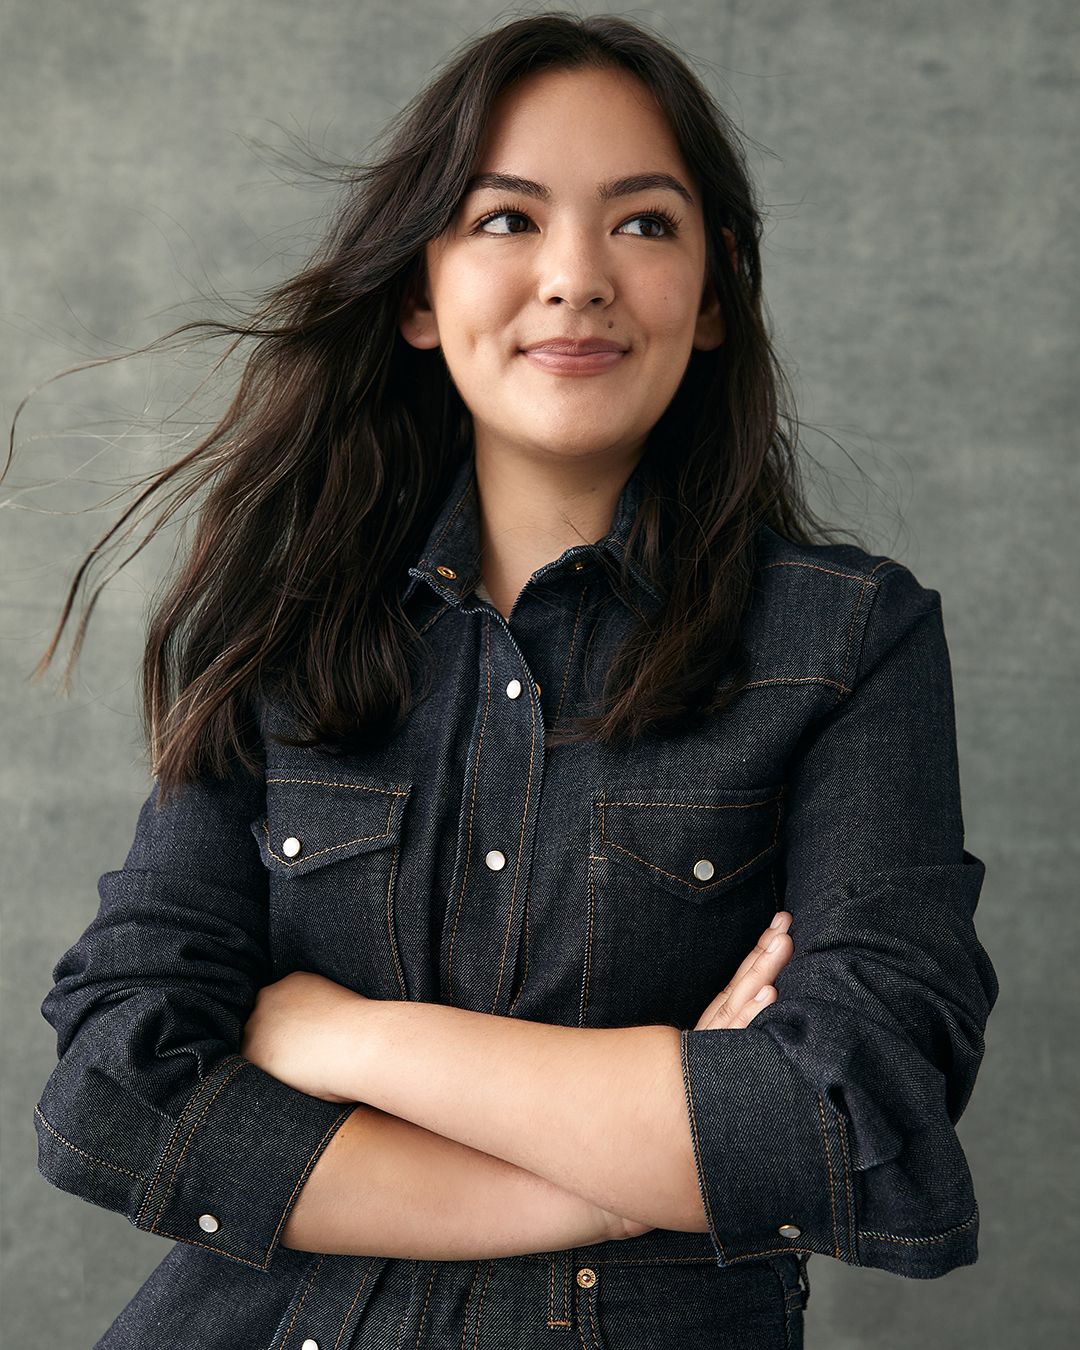 Vogue Codes winner and engineer Grace Brown with long brown hair posing with arms crossed in denim shirt